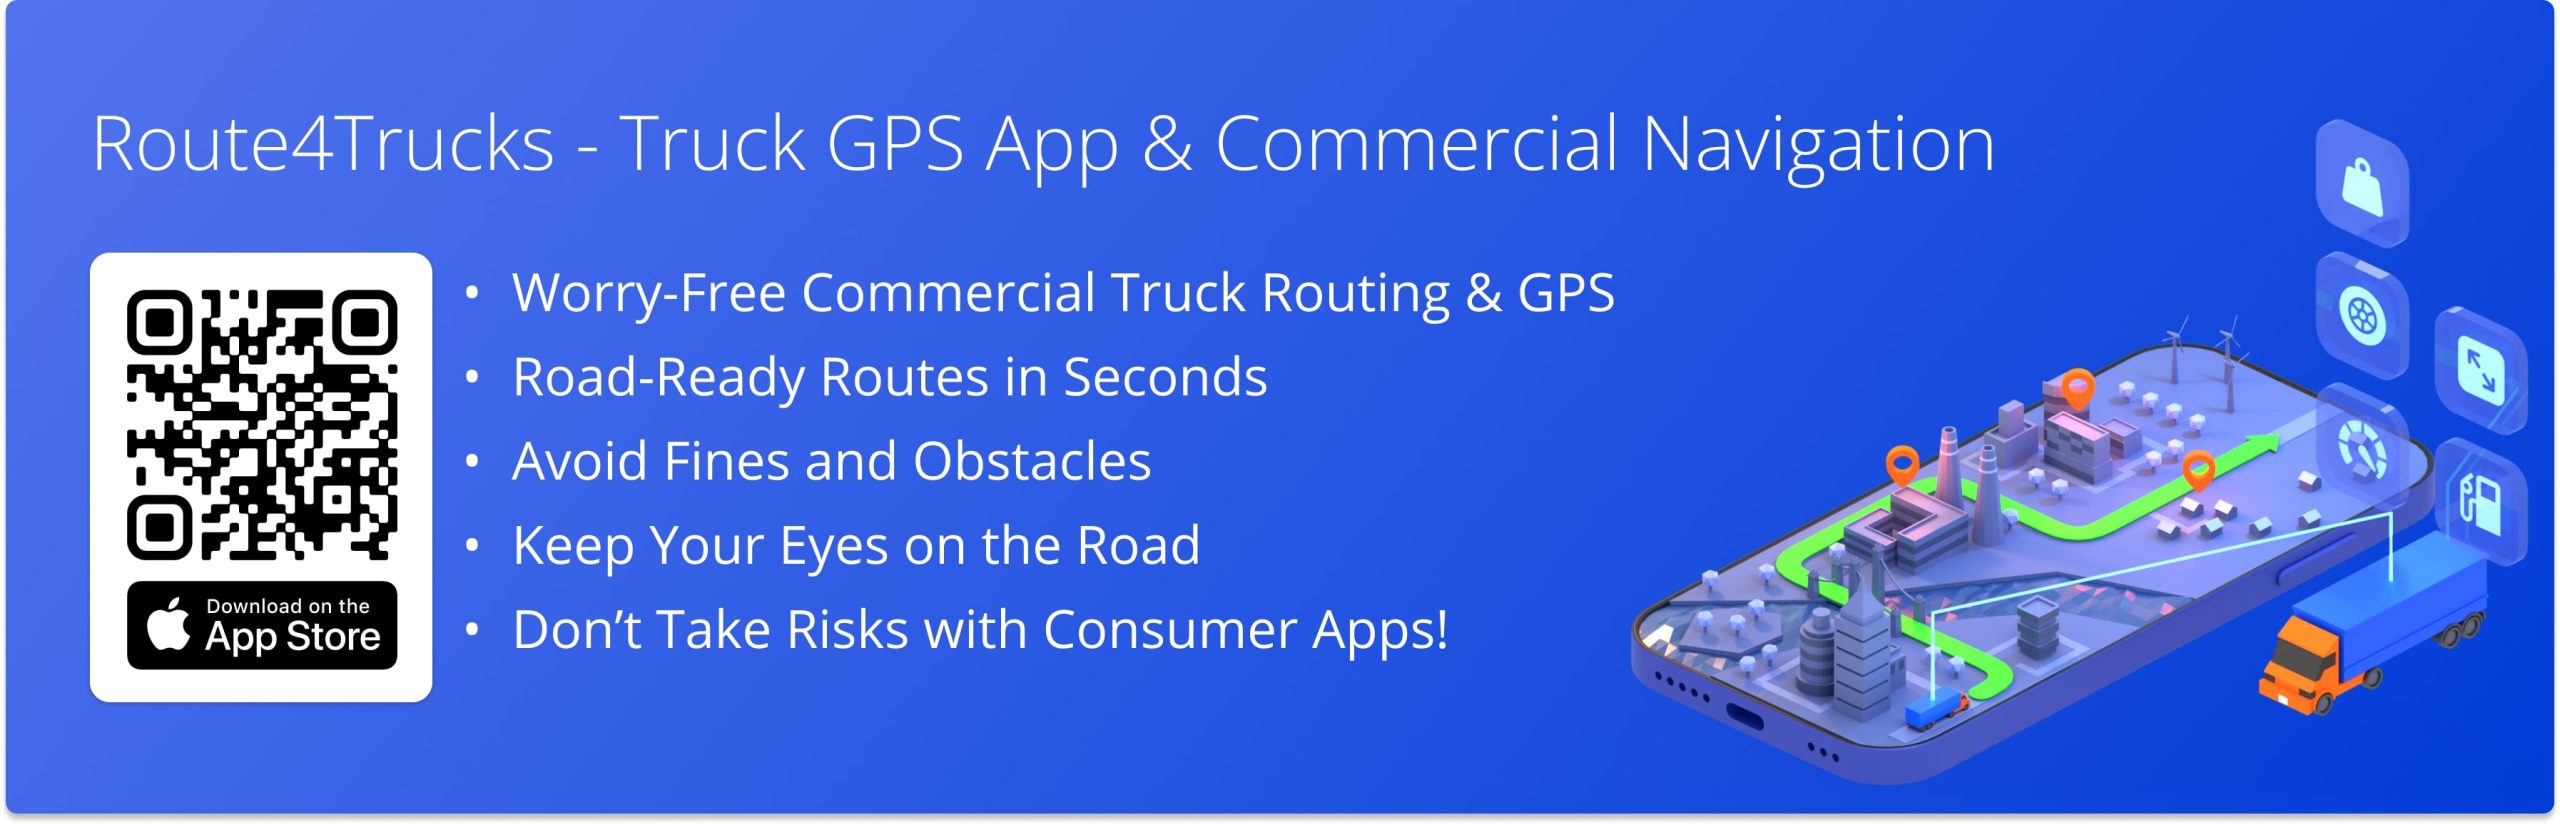 Route4Trucks - multi-stop route planner app with in-app GPS truck navigation for truckers and commercial vehicles.